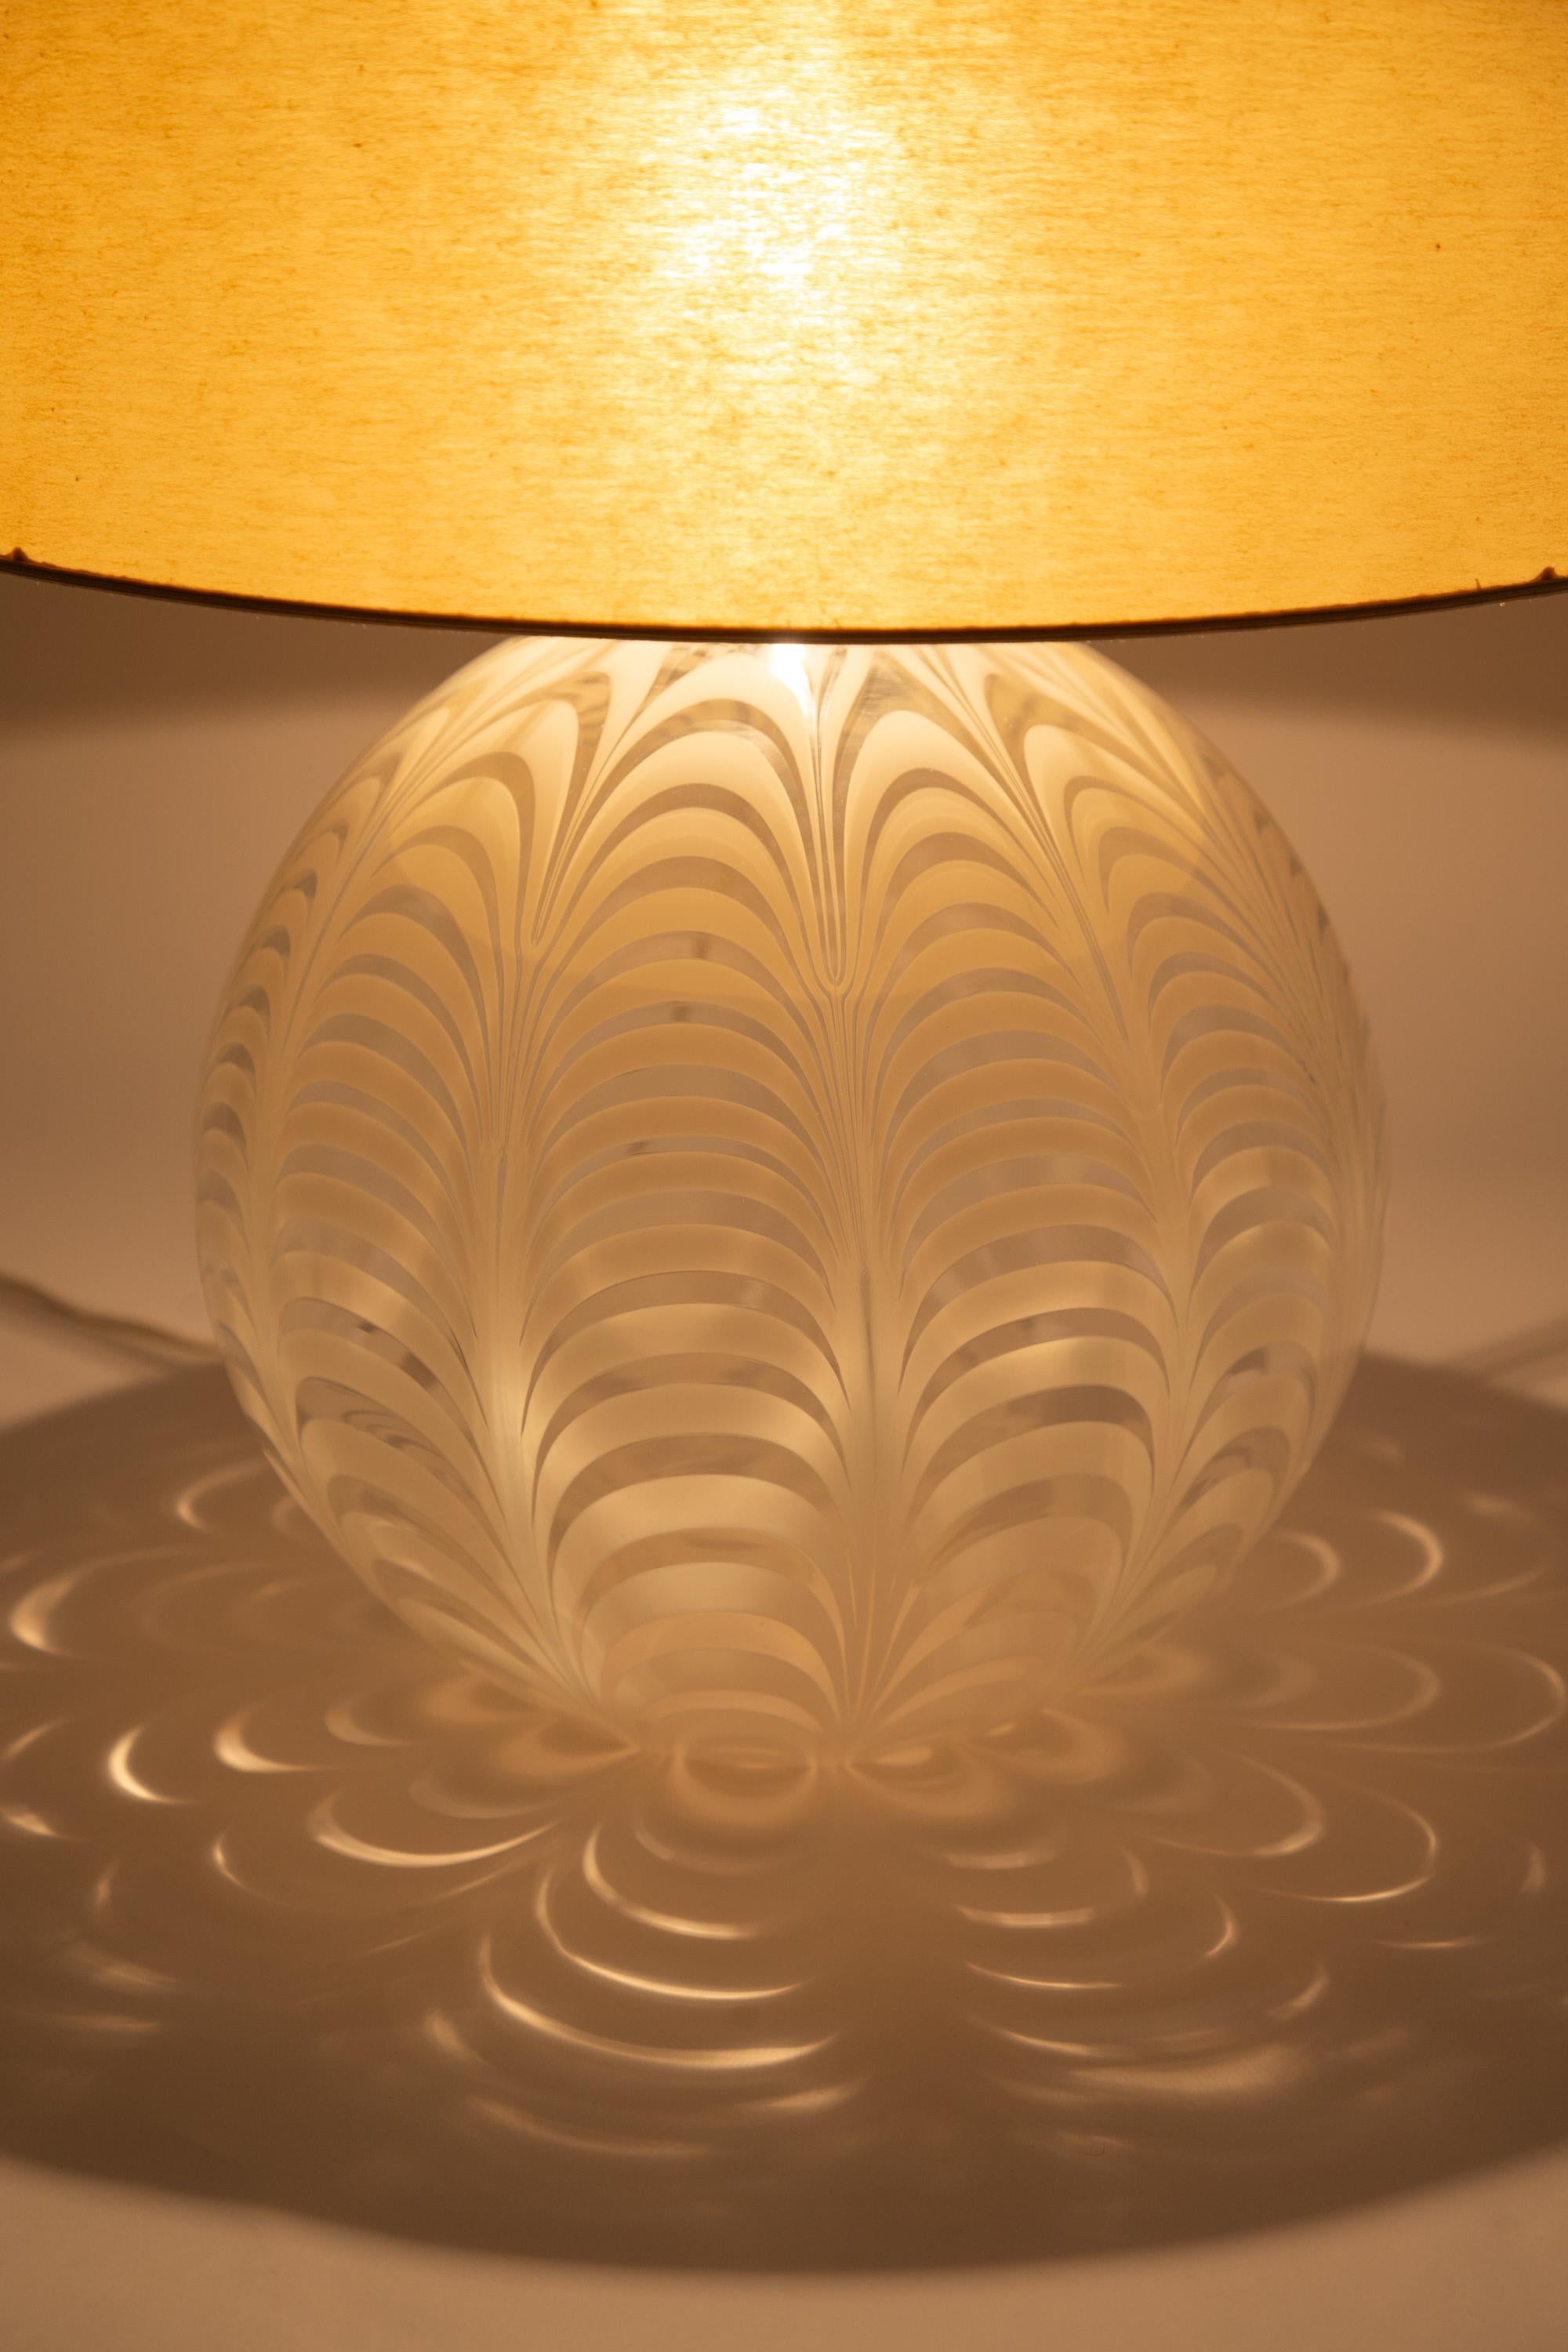 A large blown glass, 'phoenician' pattern, table lamp. Murano, 1970s.

Retains original laminated linen shade in good condition. A smaller custom made shade in fabric or parchment can be made to order.

Base Dimensions: 39 x 39 cm
Shade Dimensions: